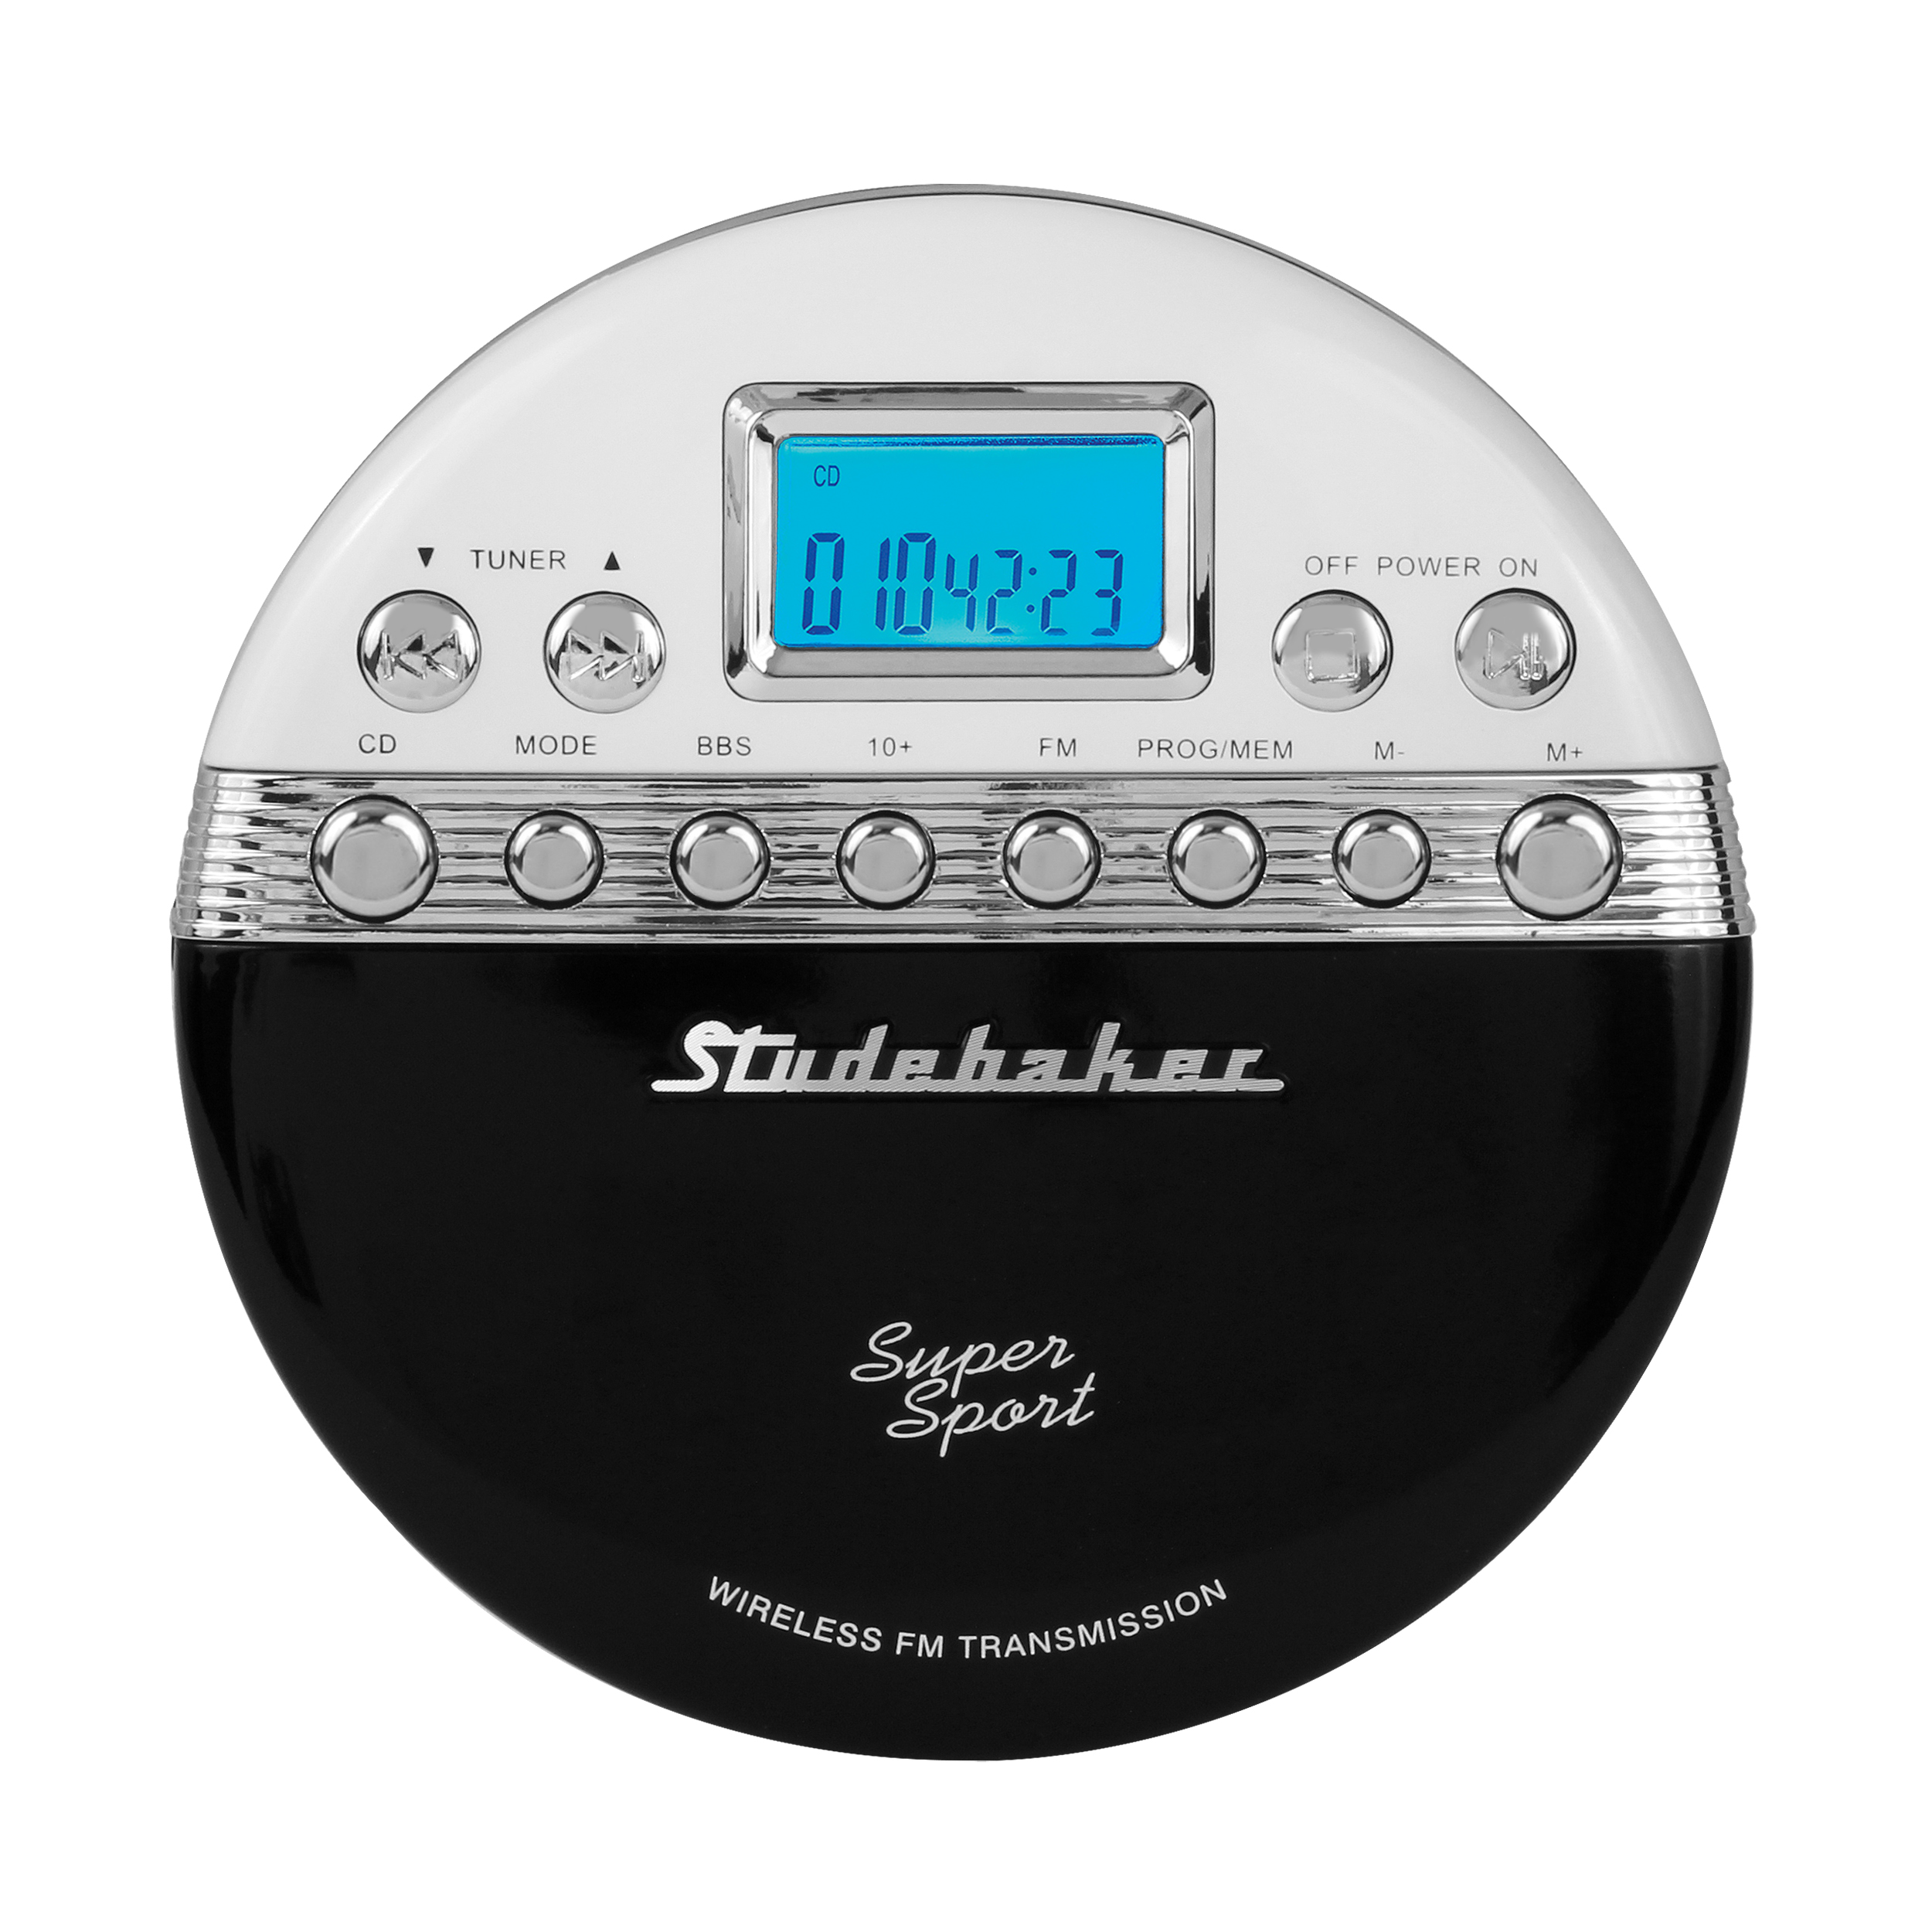 Studebaker SB3705BW Super Sport Portable CD Player Plays CDs Wirelessly Through your Car Radio Includes FM Stereo Radio and Color Coordinated Stereo Earbuds - image 2 of 5